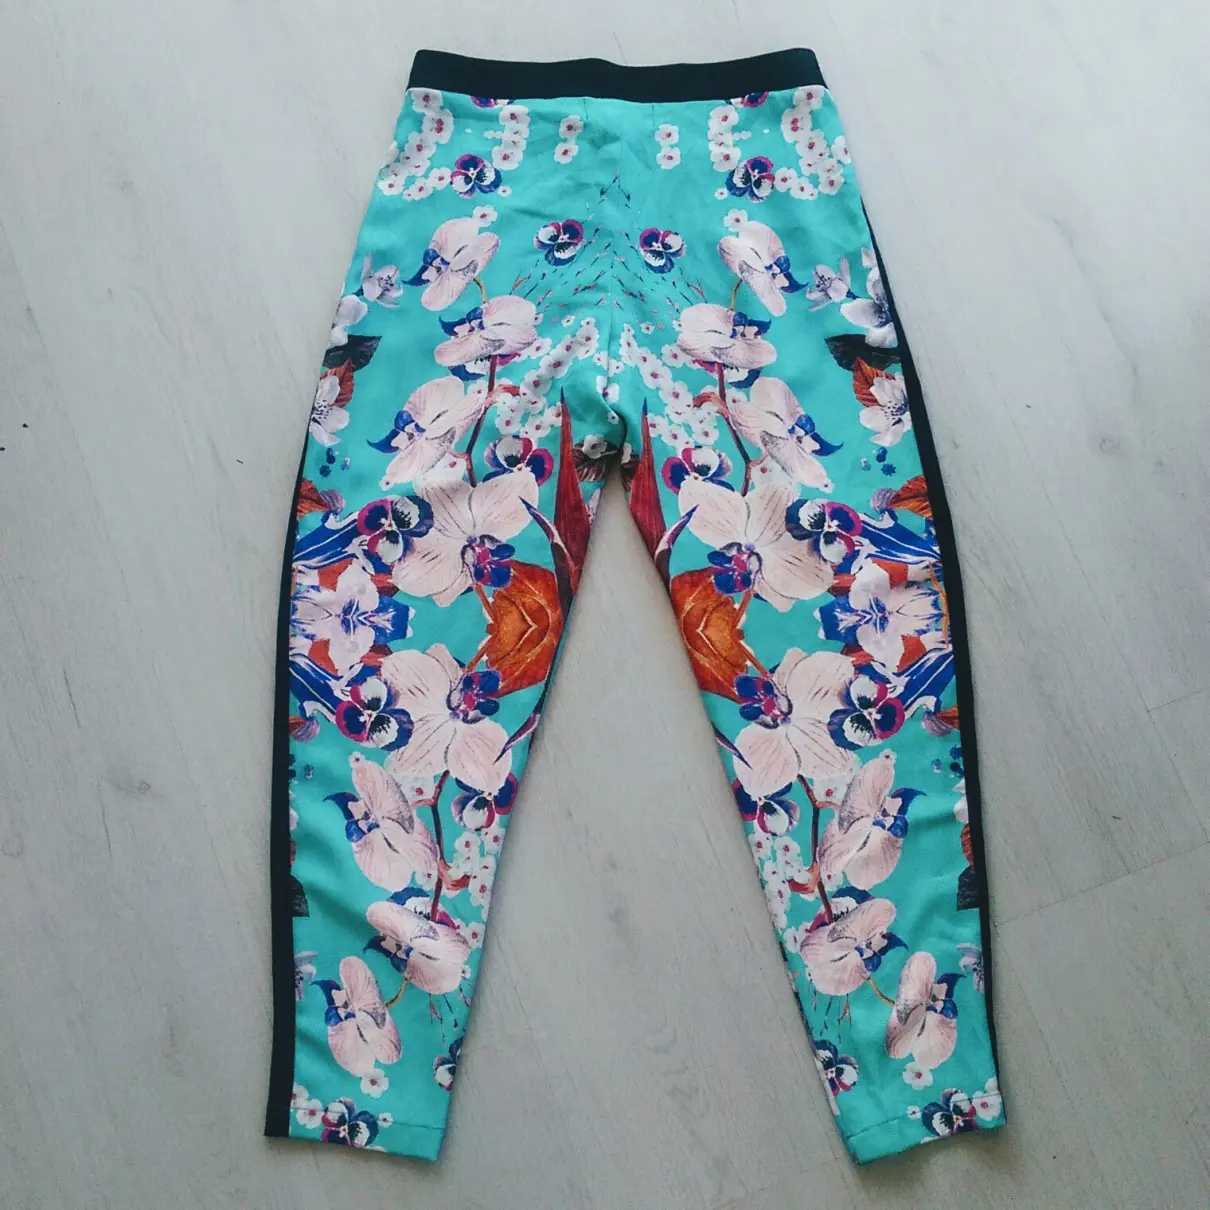 Clover Canyon Slim pants for sale